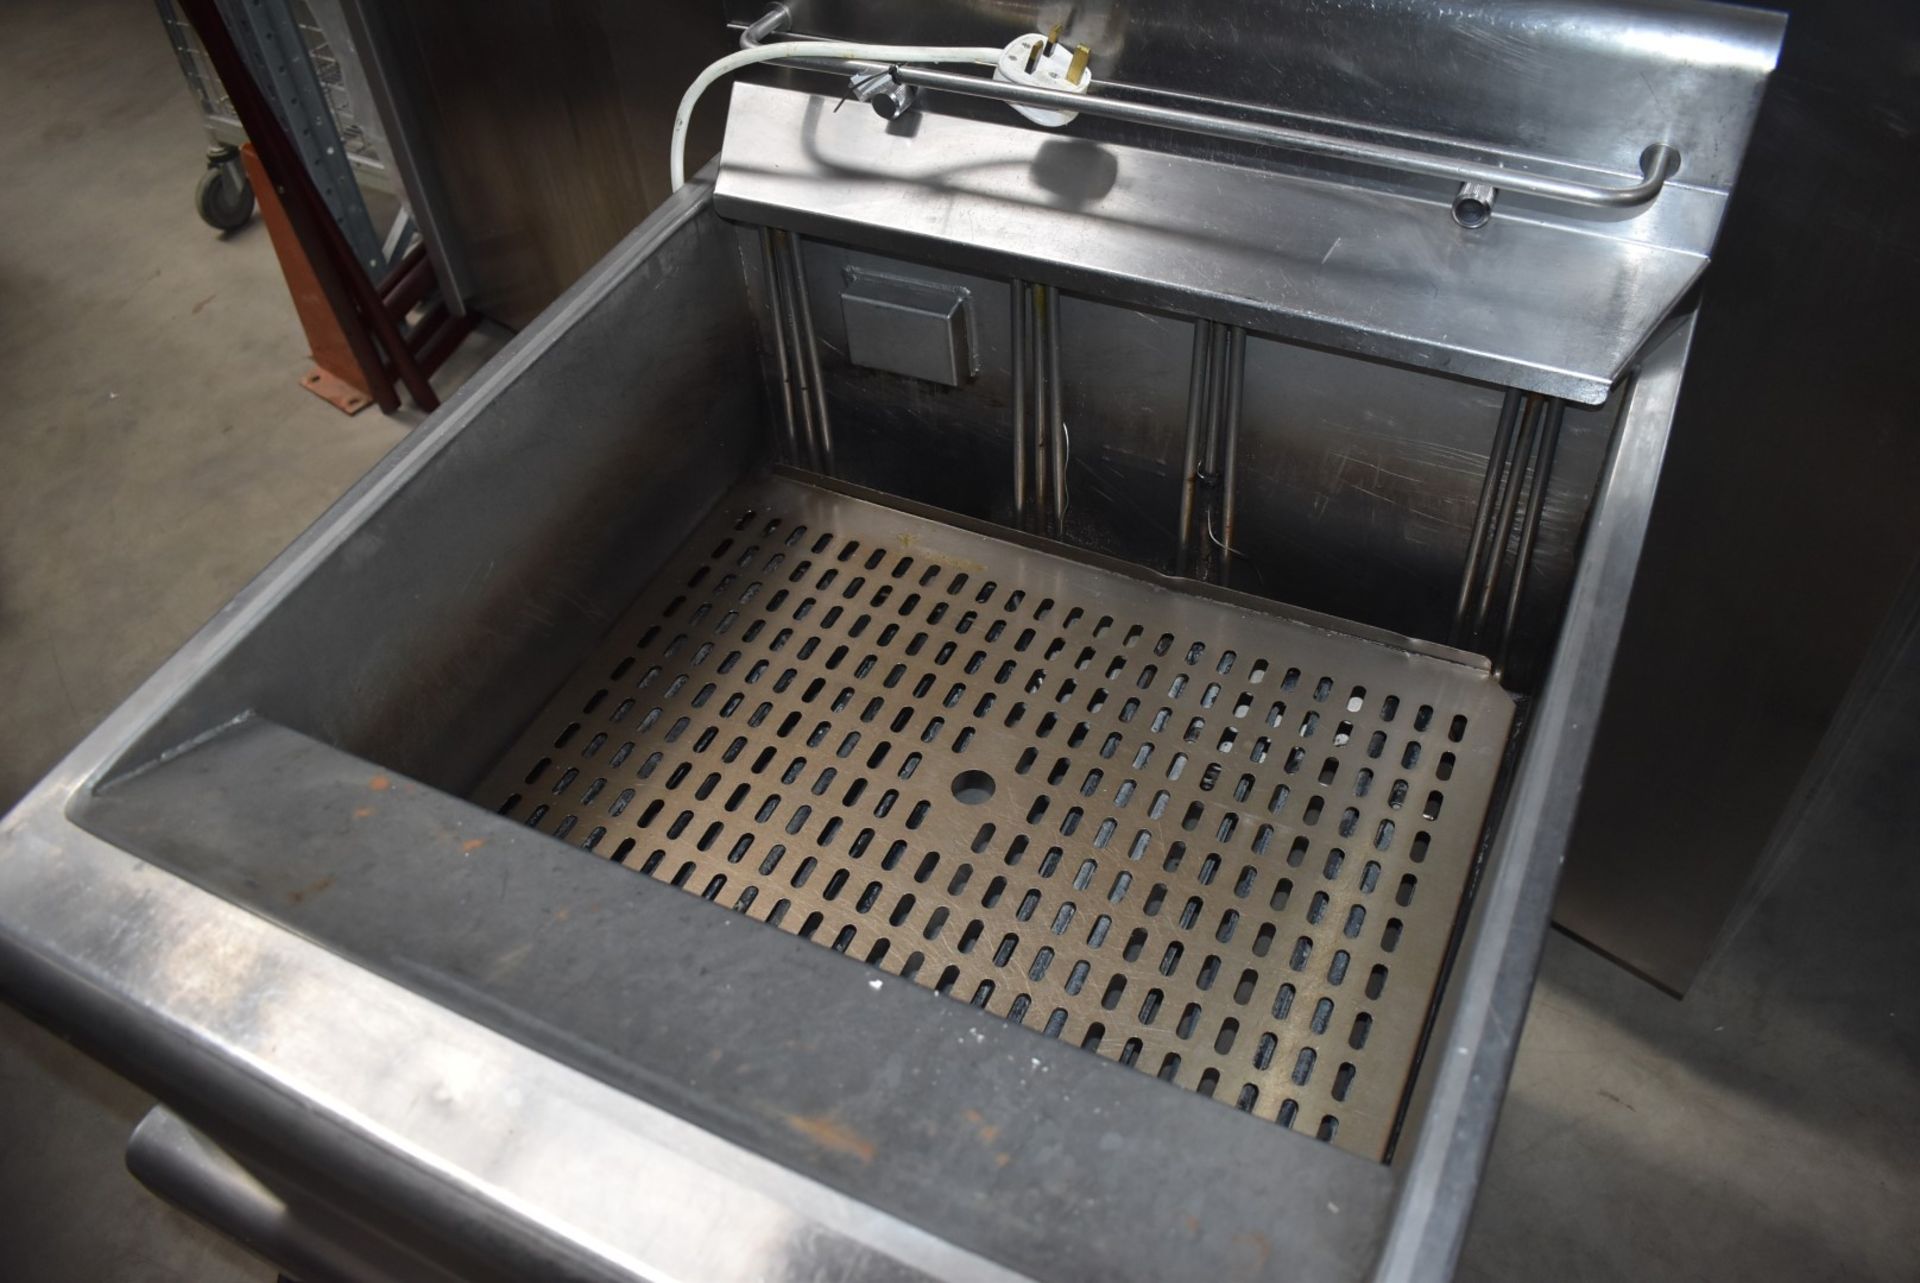 1 x Lincat Opus 700 Single Tank Electric Fryer With Built In Filtration - 3 Phase - Image 5 of 19